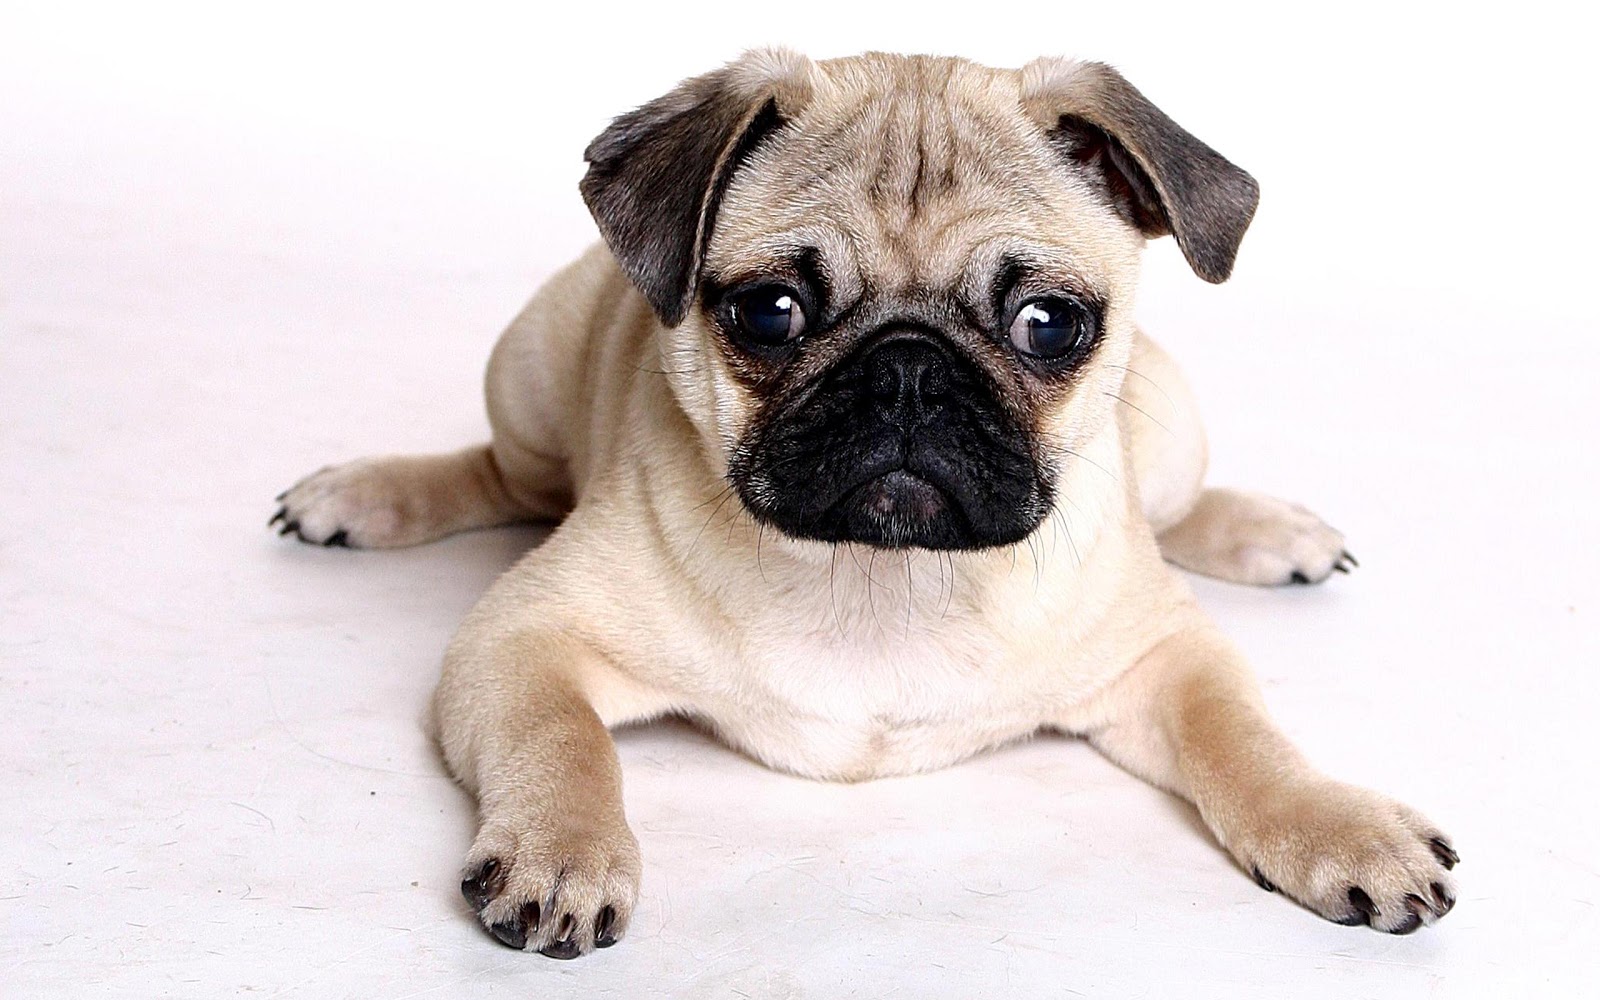 Cute Puppy Dogs: Pug Dog Puppies